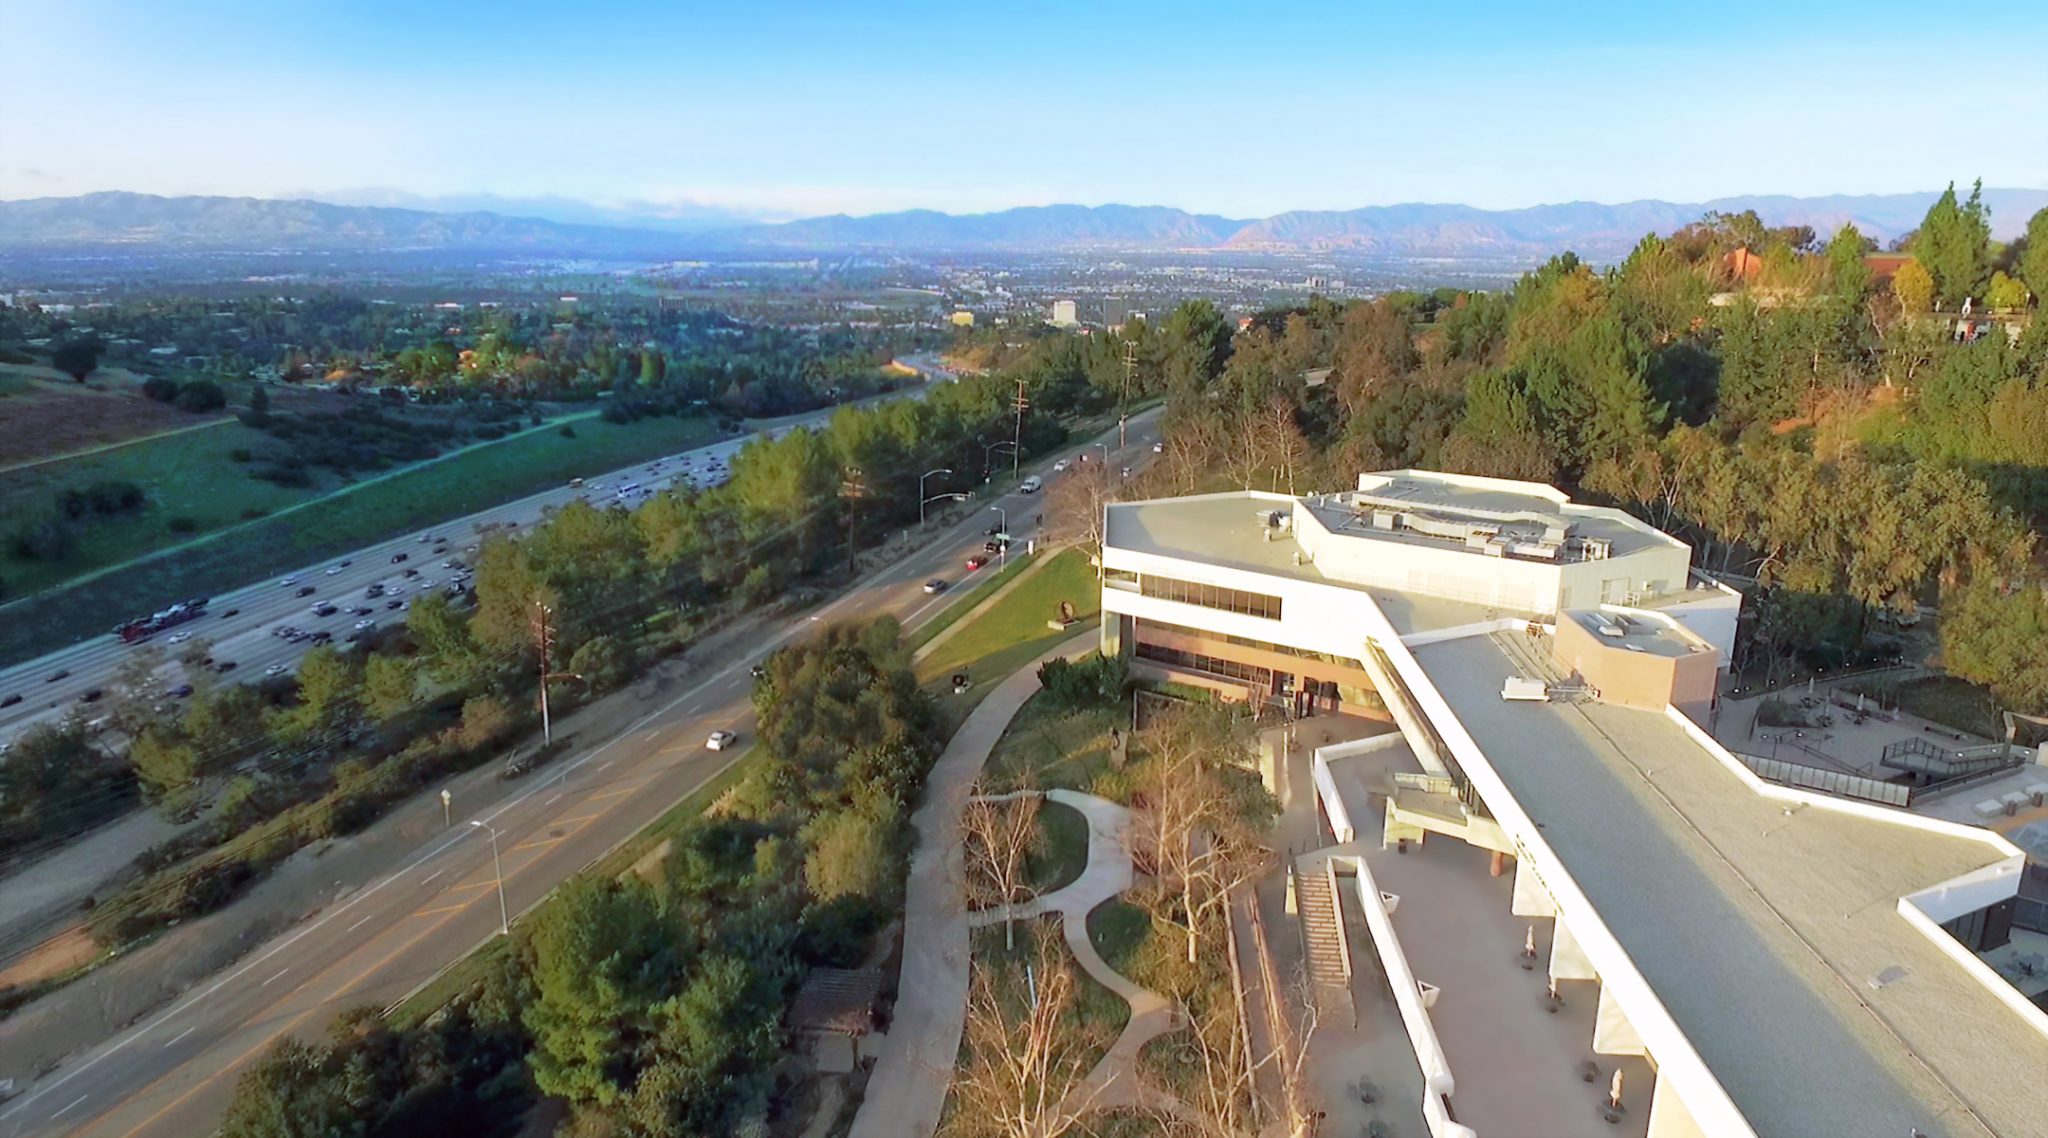 American Jewish University is selling ‘all or part’ of its Los Angeles